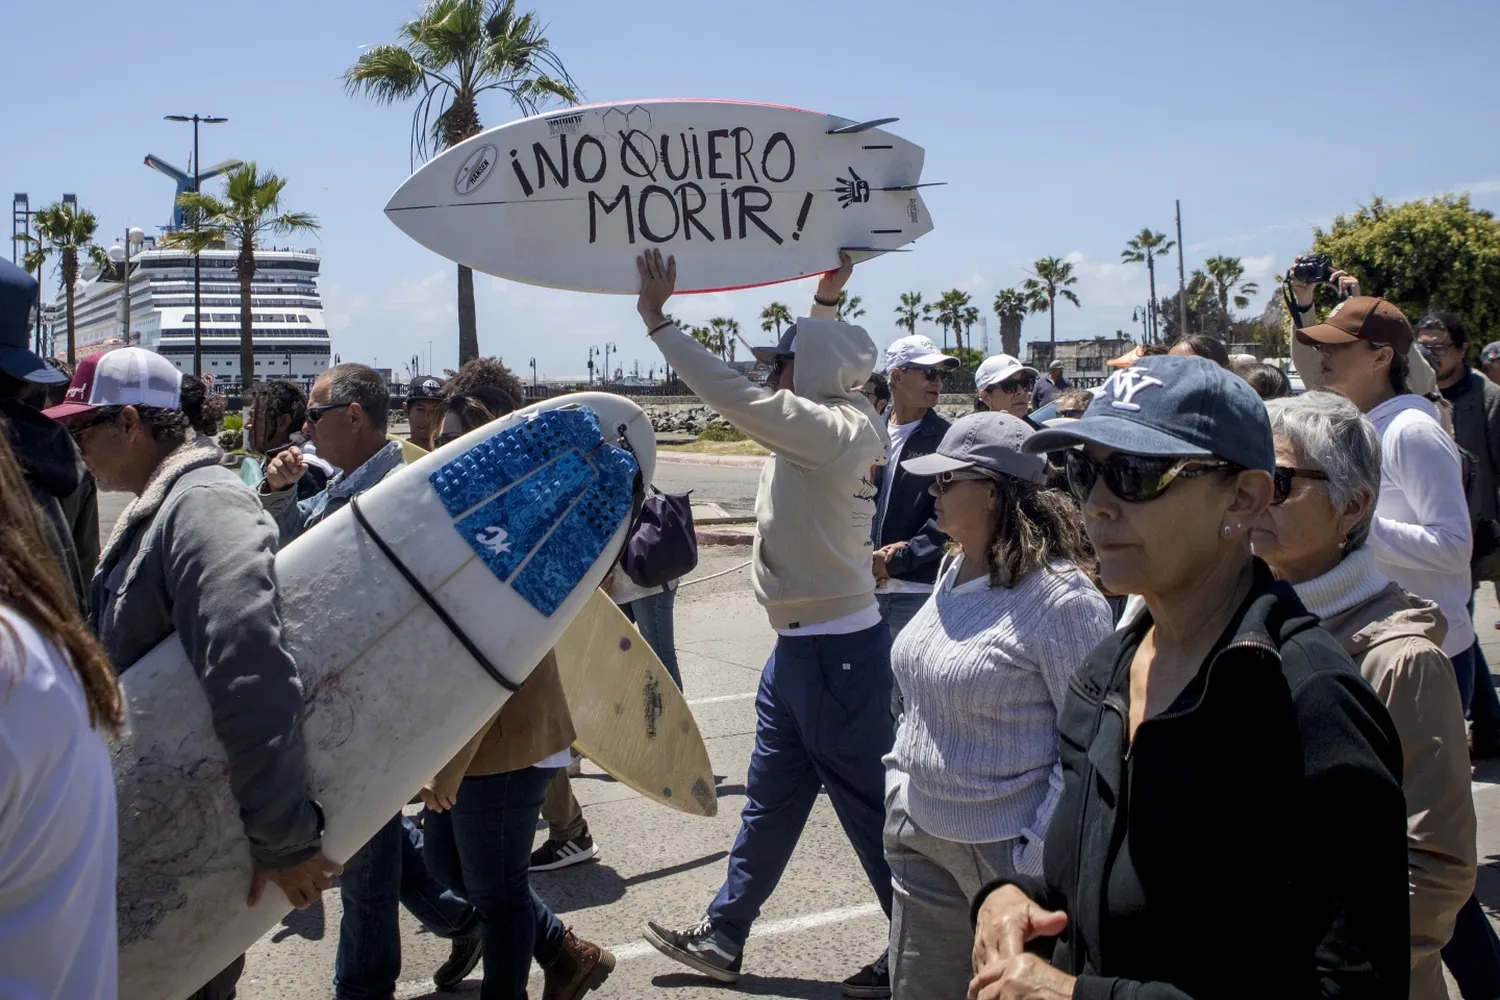 A demonstrator holding a bodyboard written in Spanish "I don't want to die" protests the disappearance of foreign surfers.